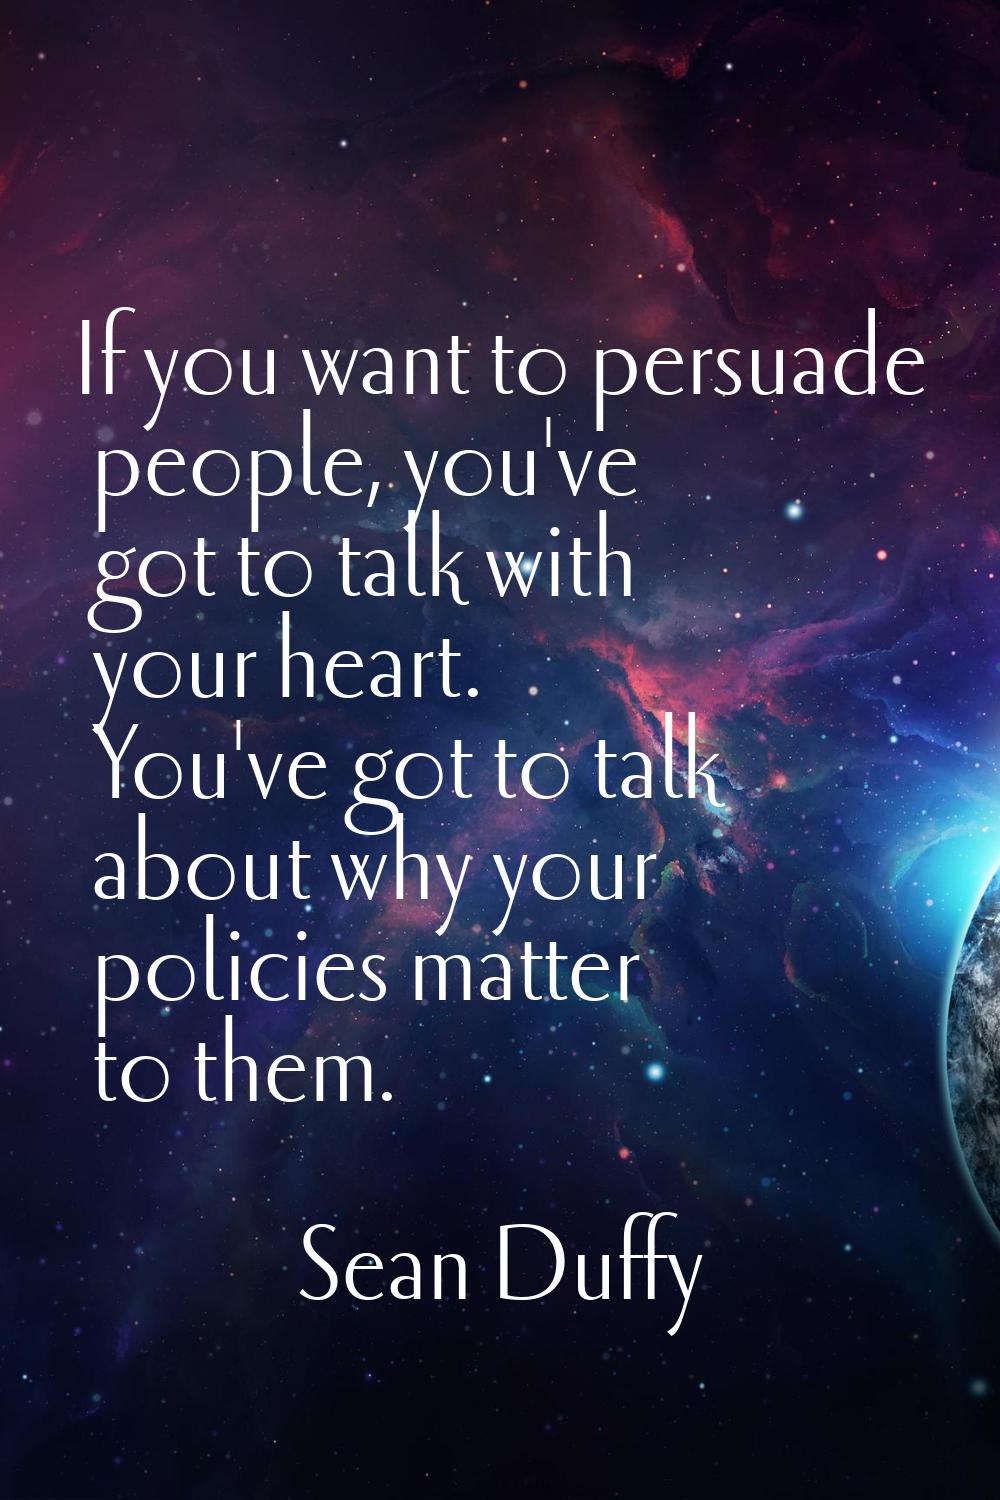 If you want to persuade people, you've got to talk with your heart. You've got to talk about why yo